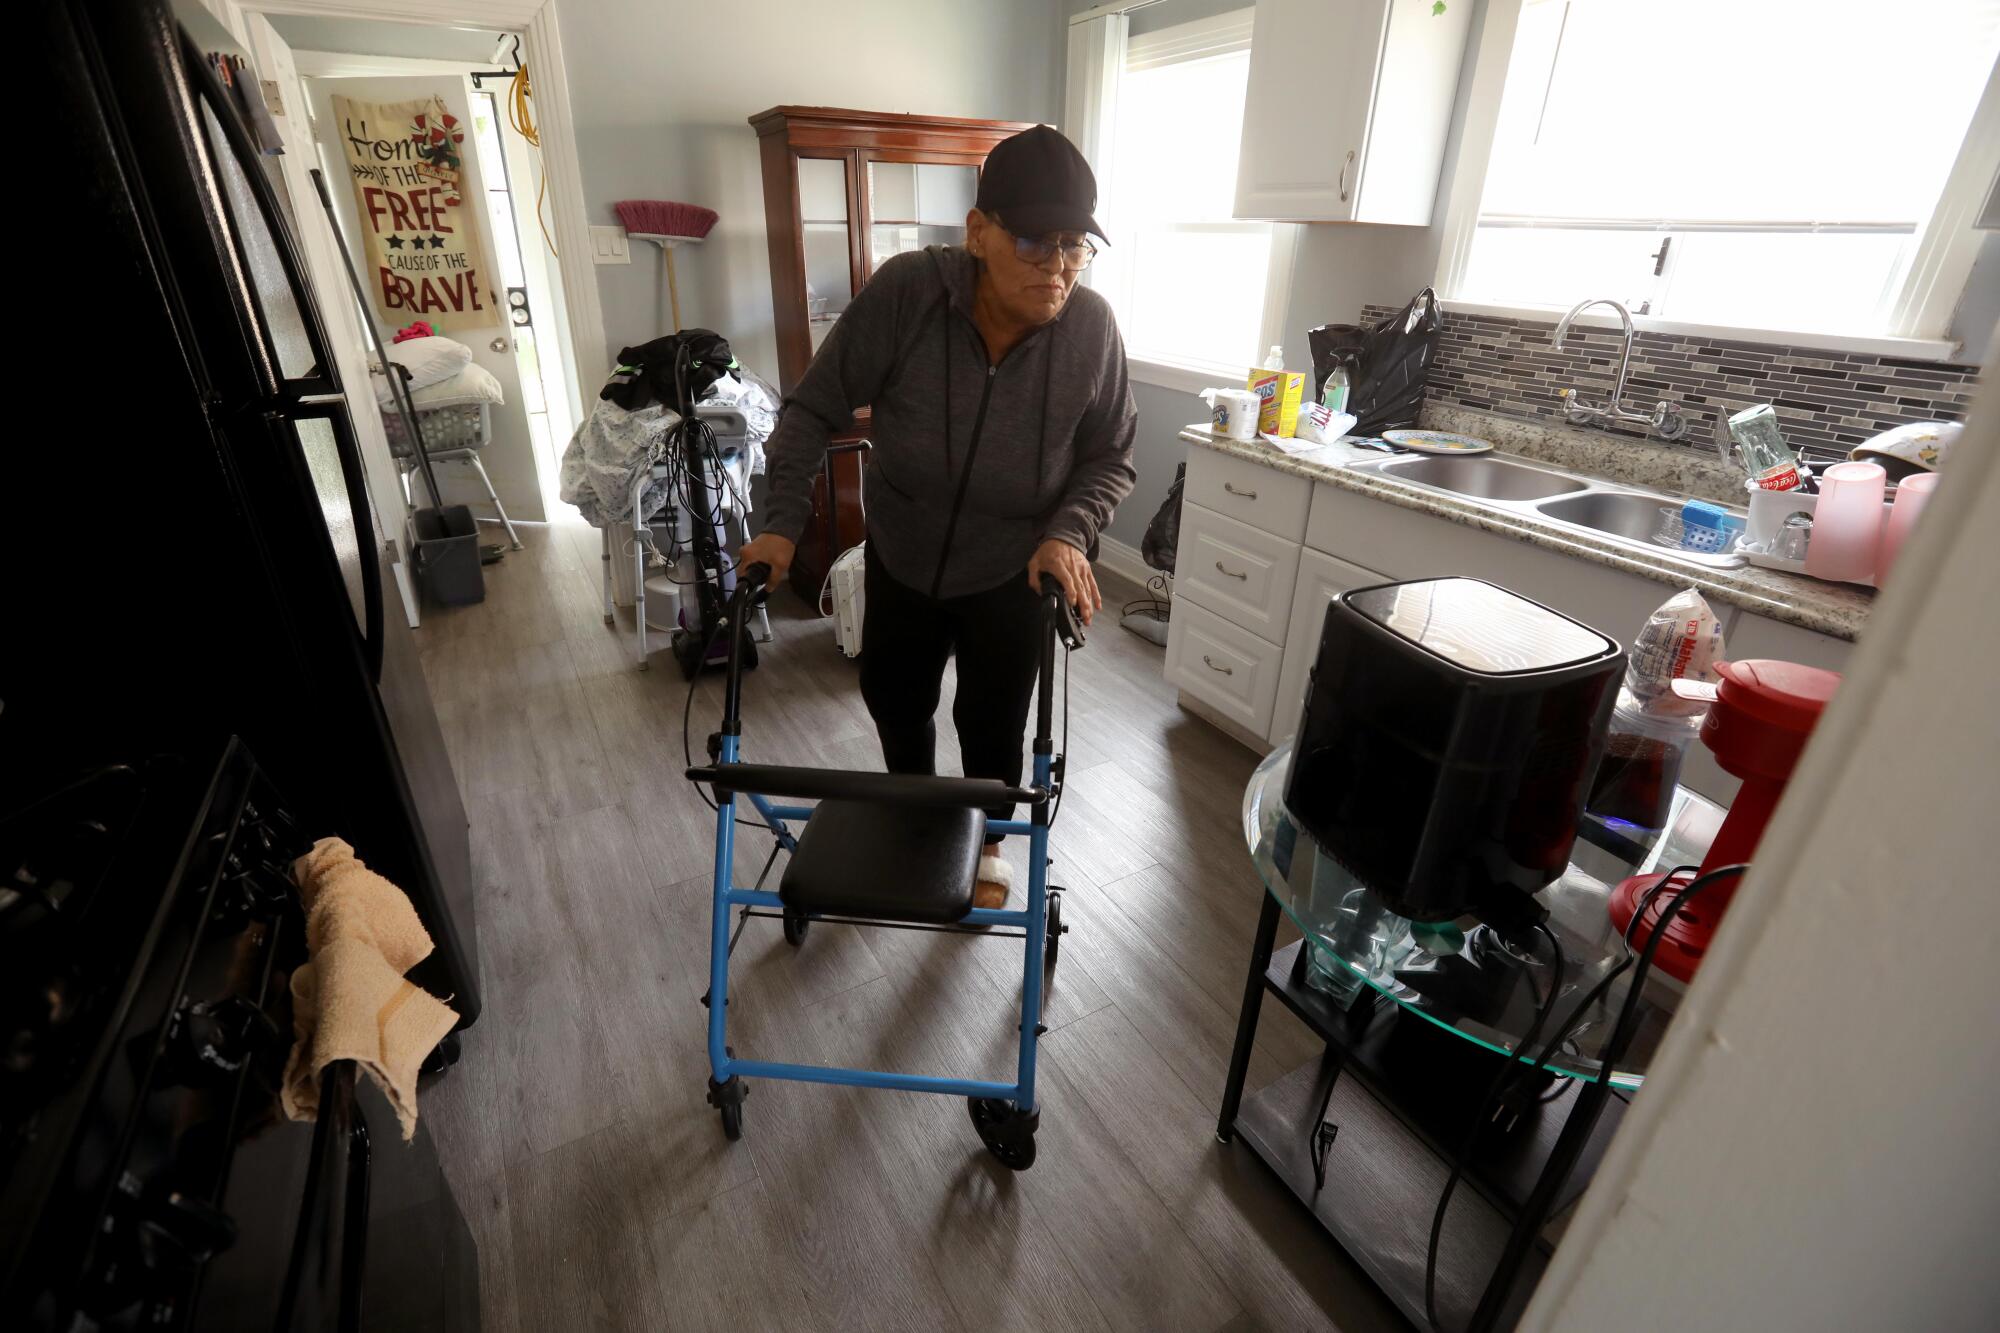 Maria Merritt makes her way through the kitchen in the Caltrans-owned home where she lives.